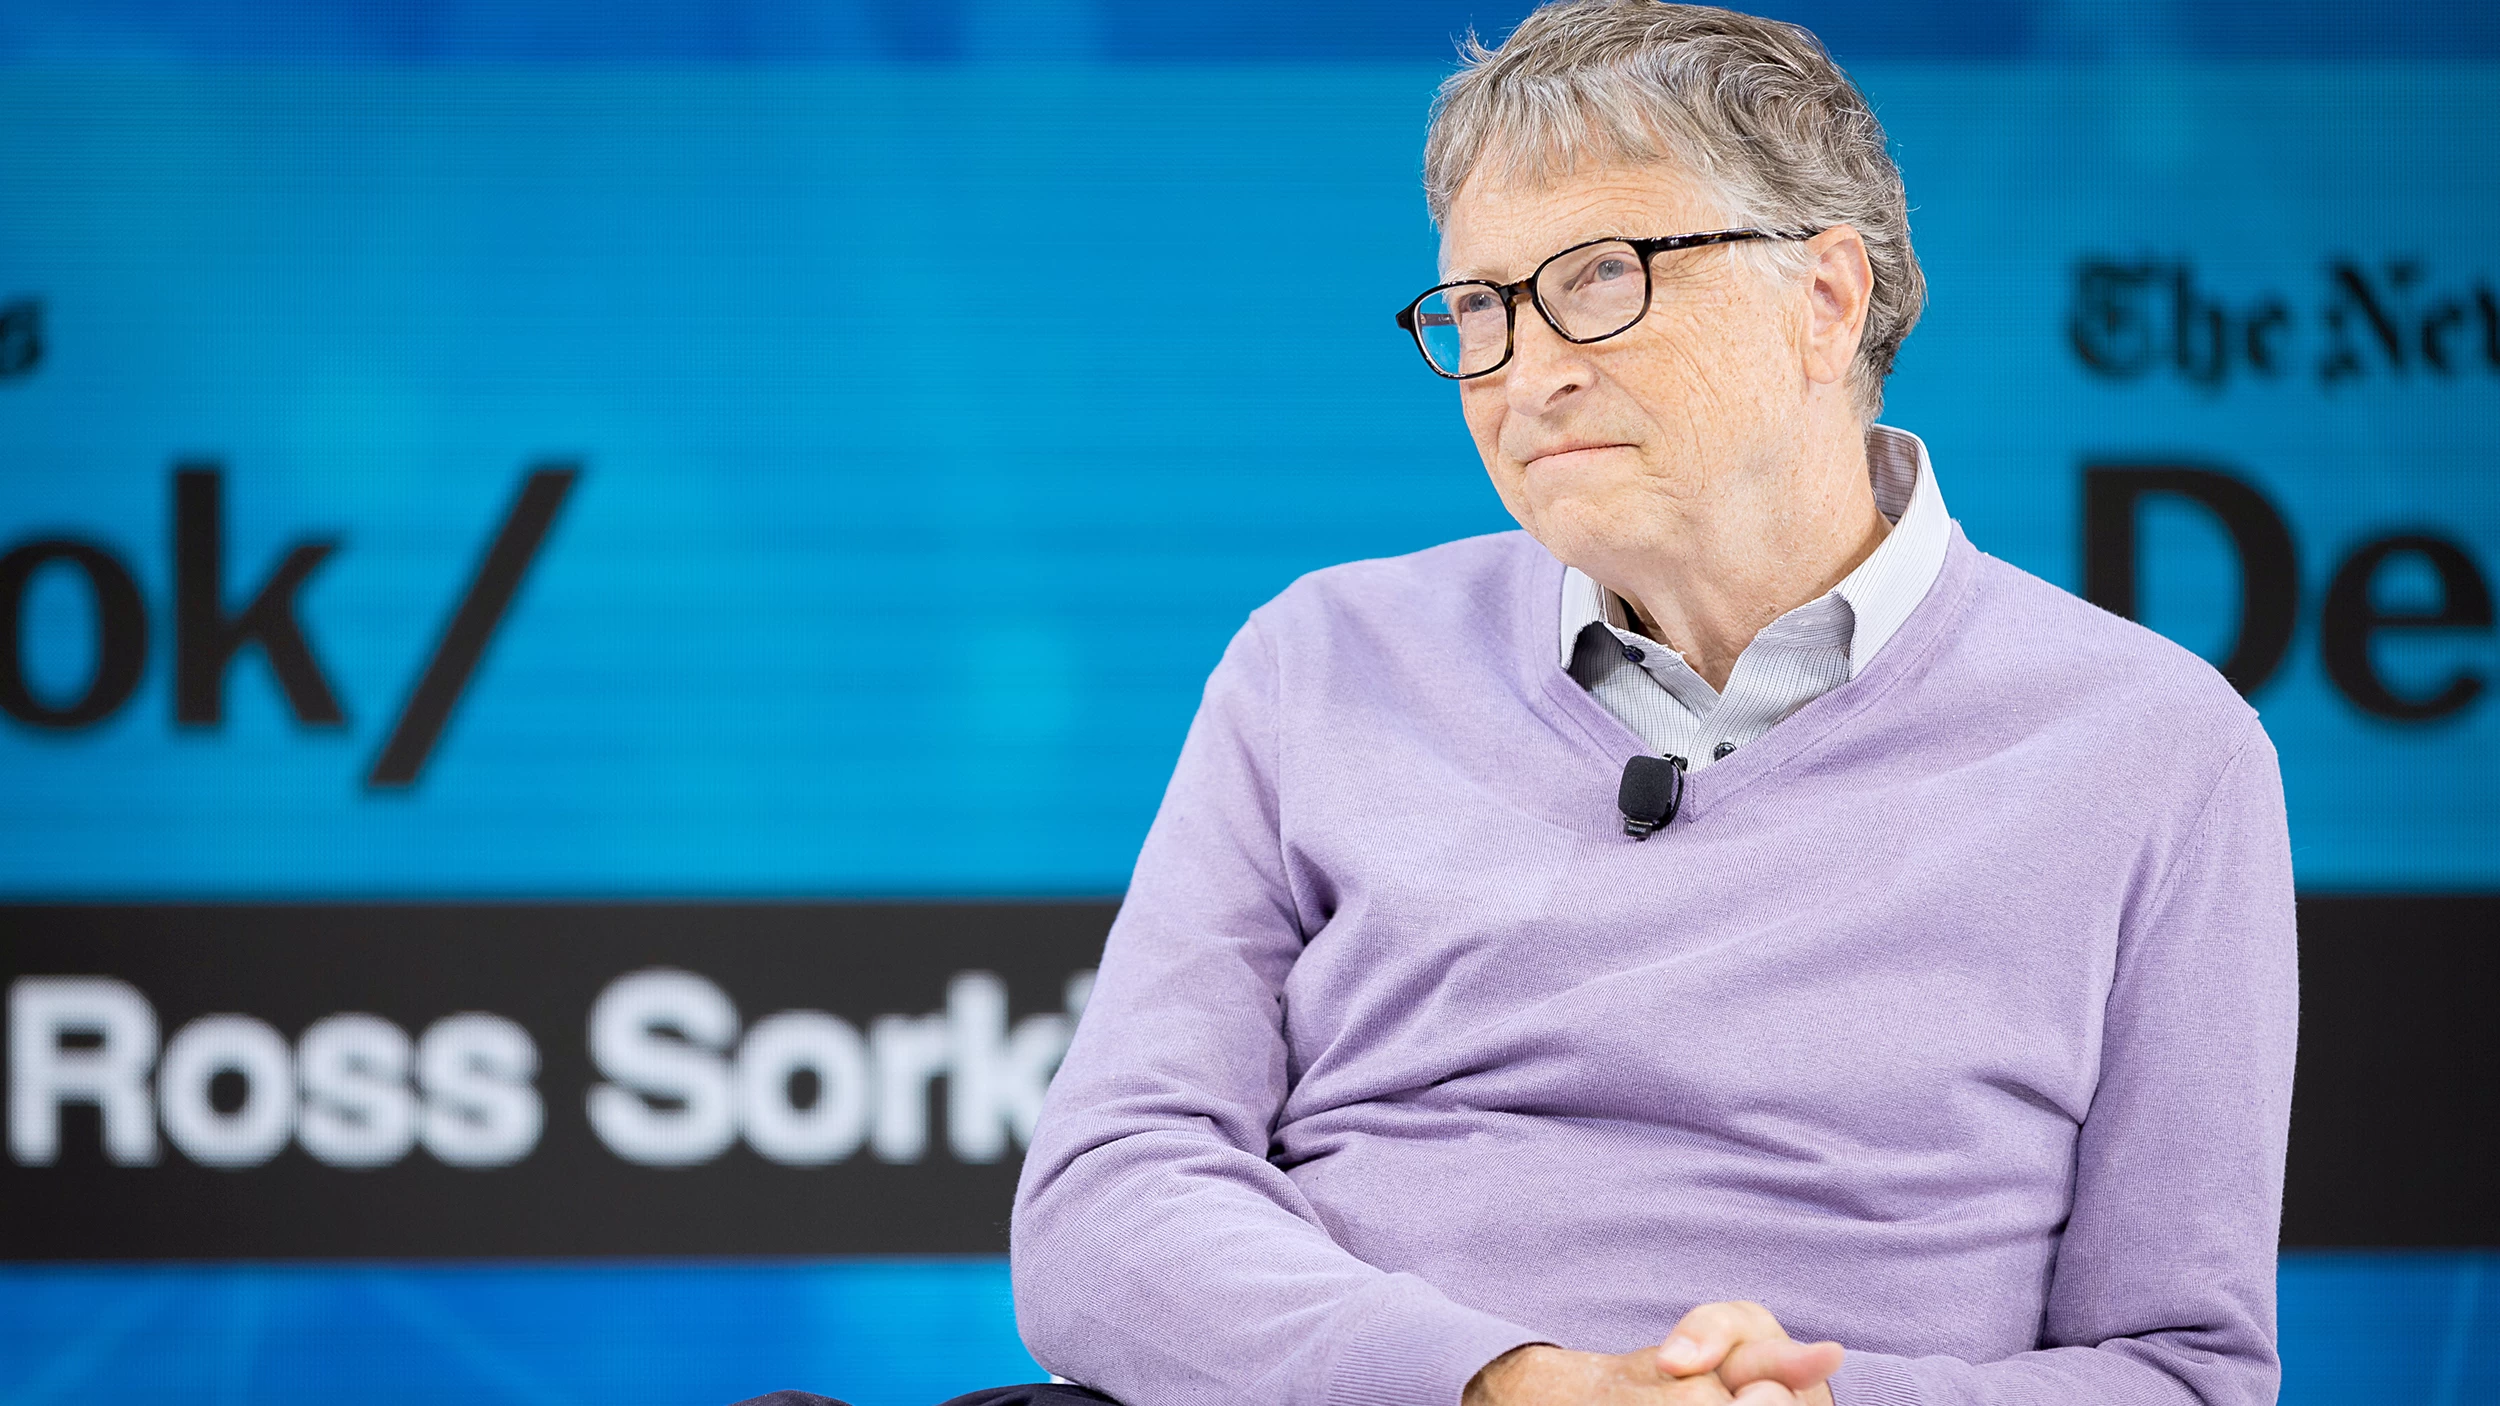 Bill Gates tells reason for using ‘Android’ instead of ‘iPhone’